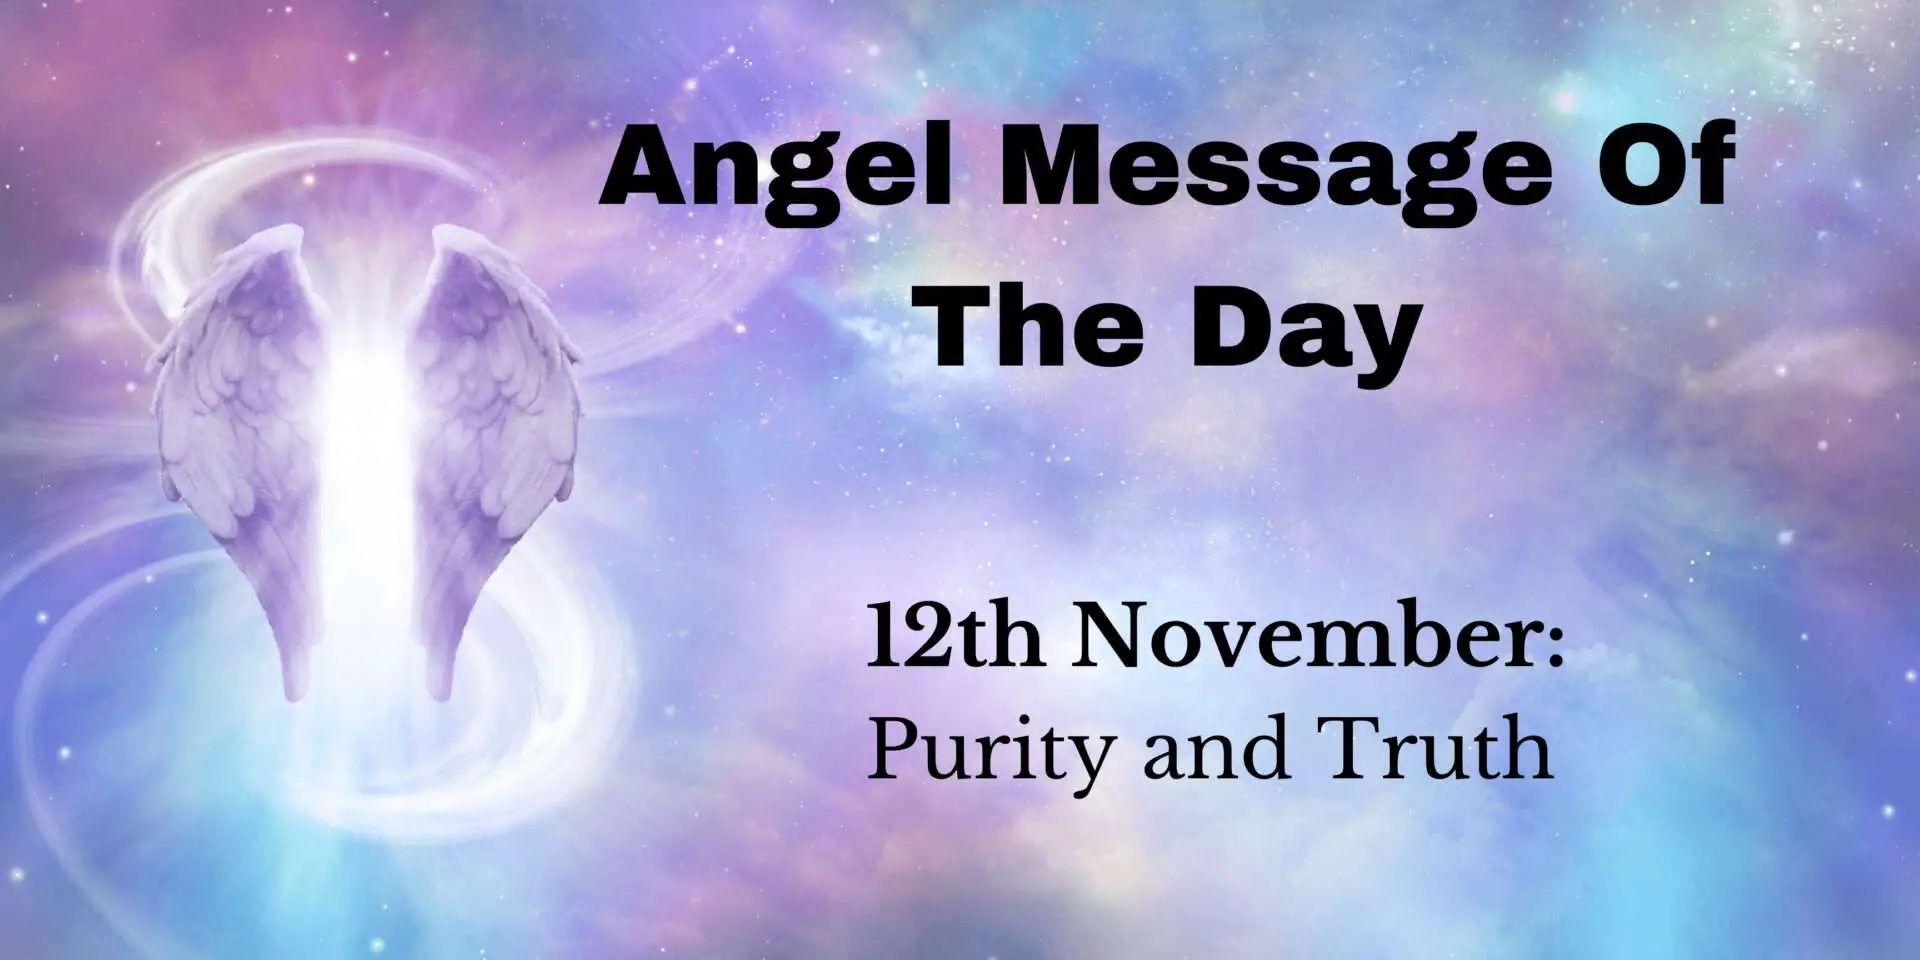 angel message of the day : purity and truth